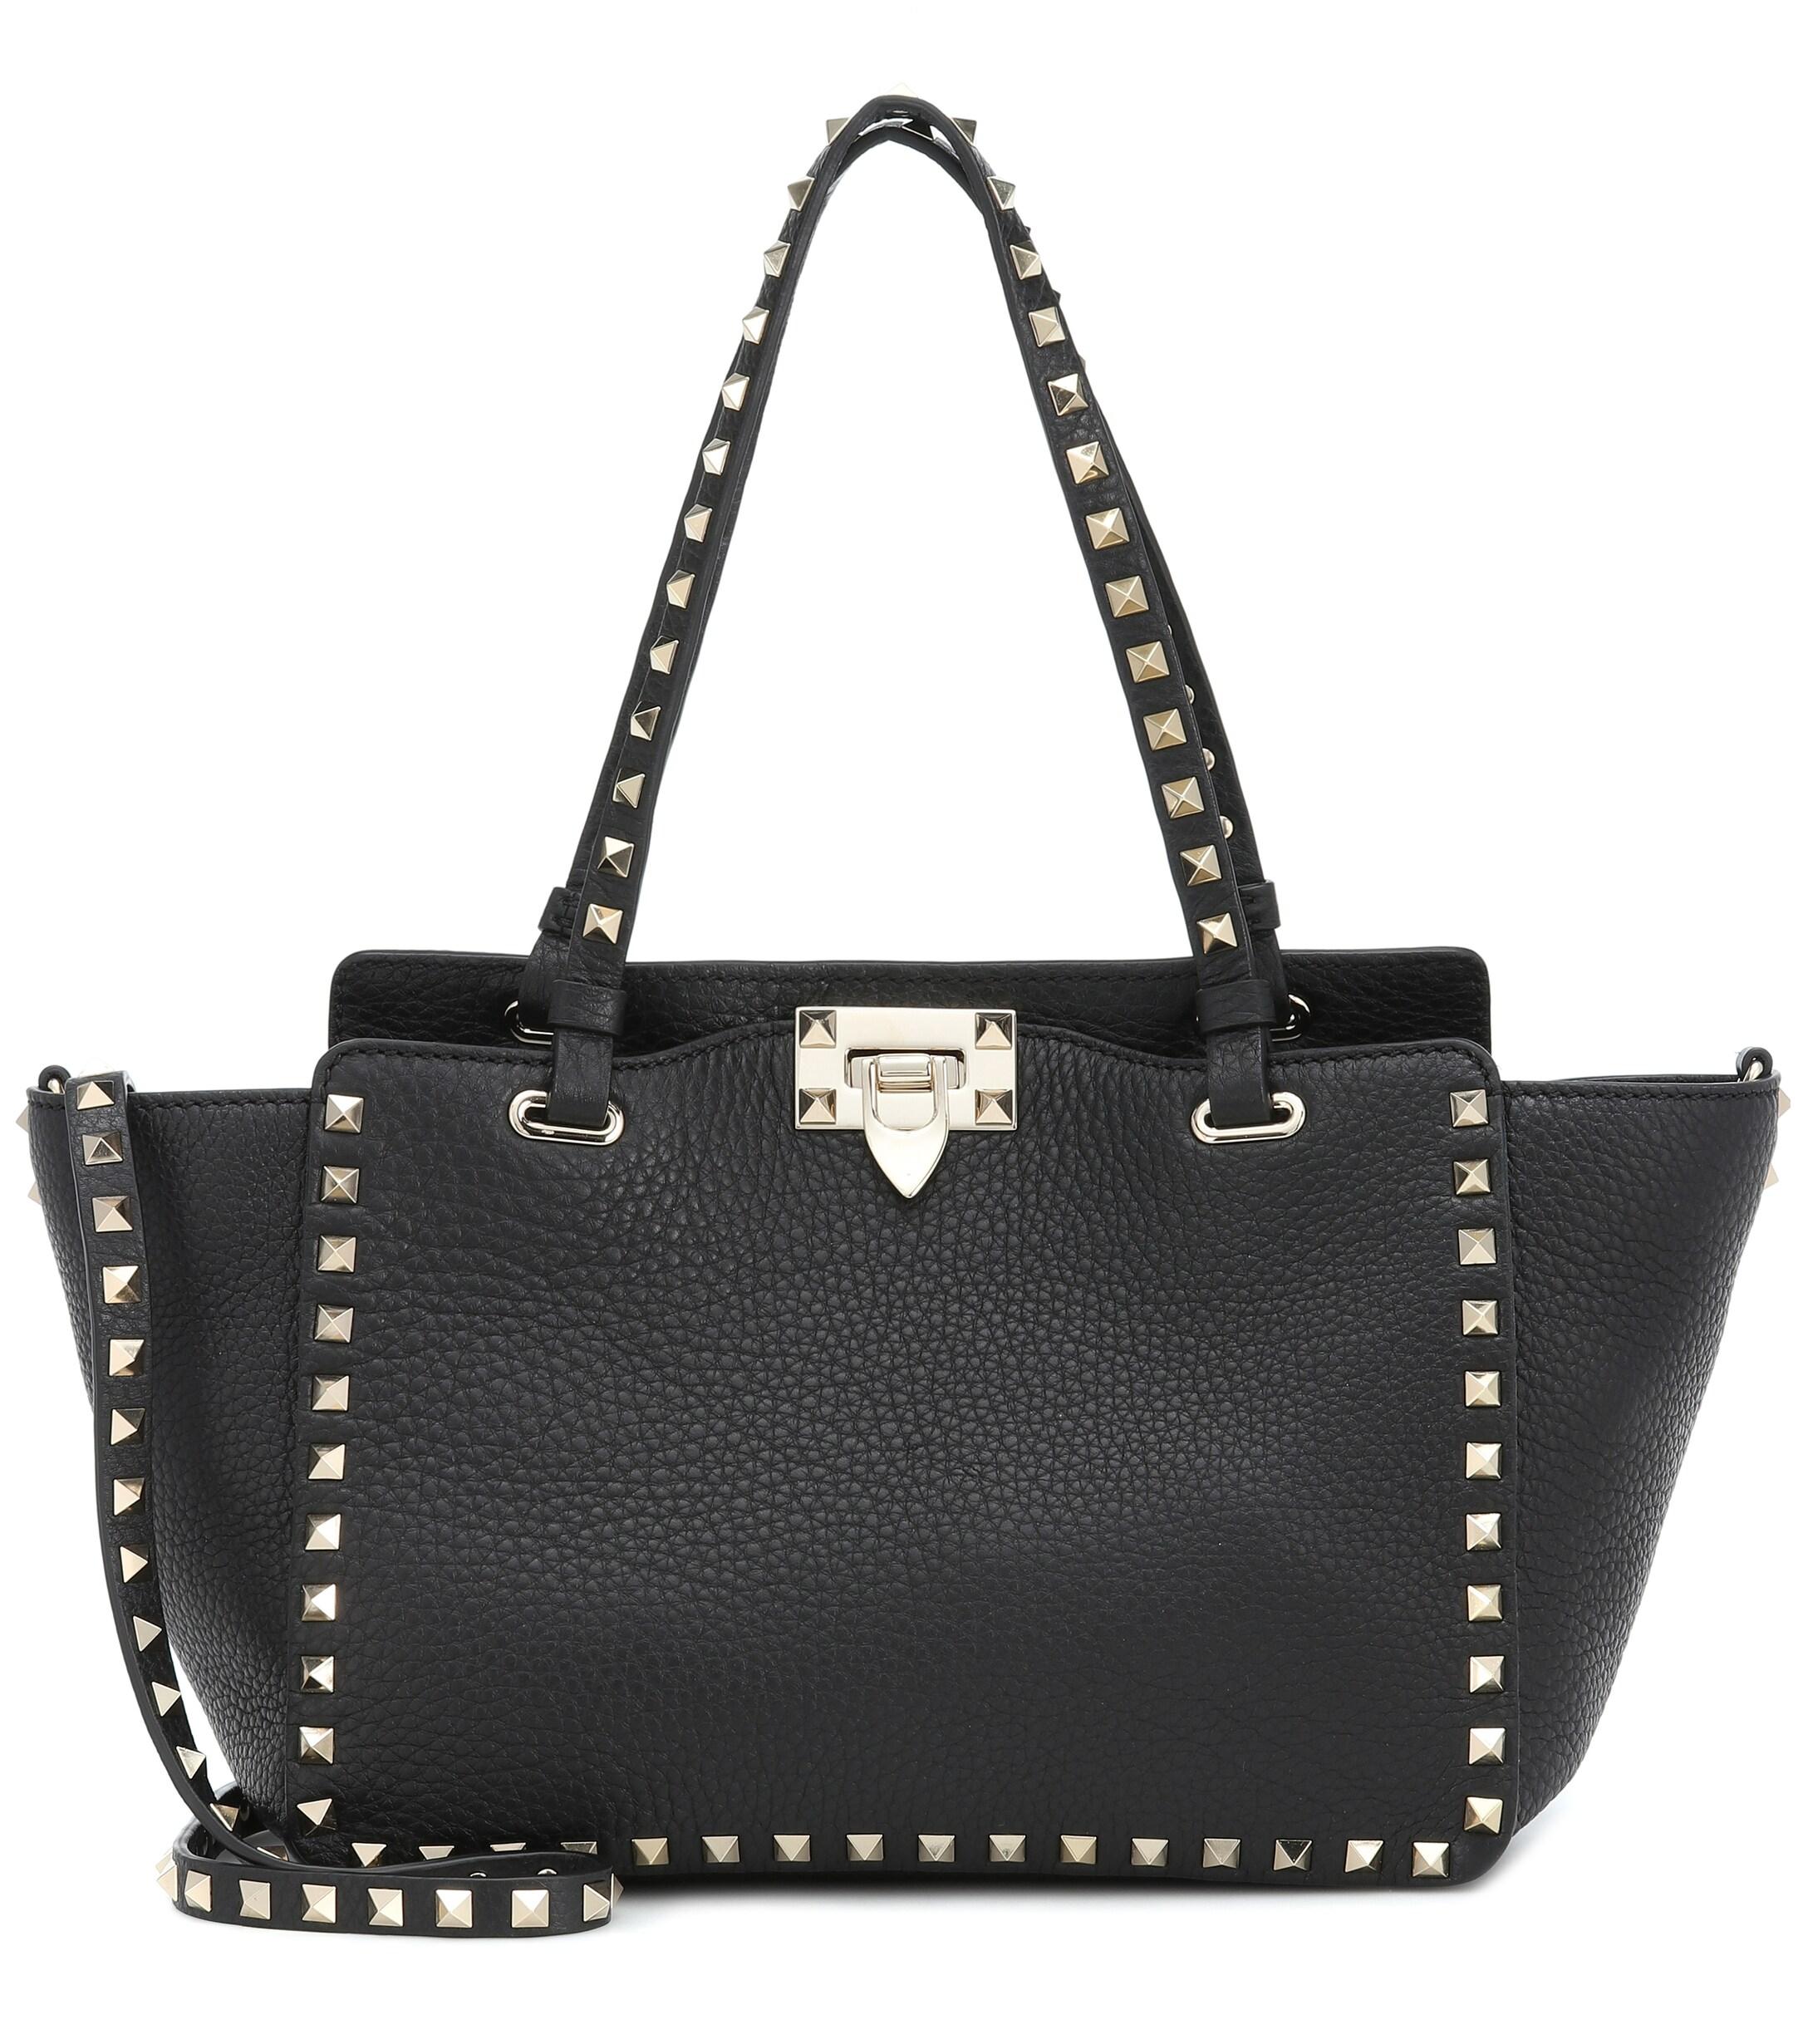 Valentino Rockstud Small Leather Tote in Black - Lyst